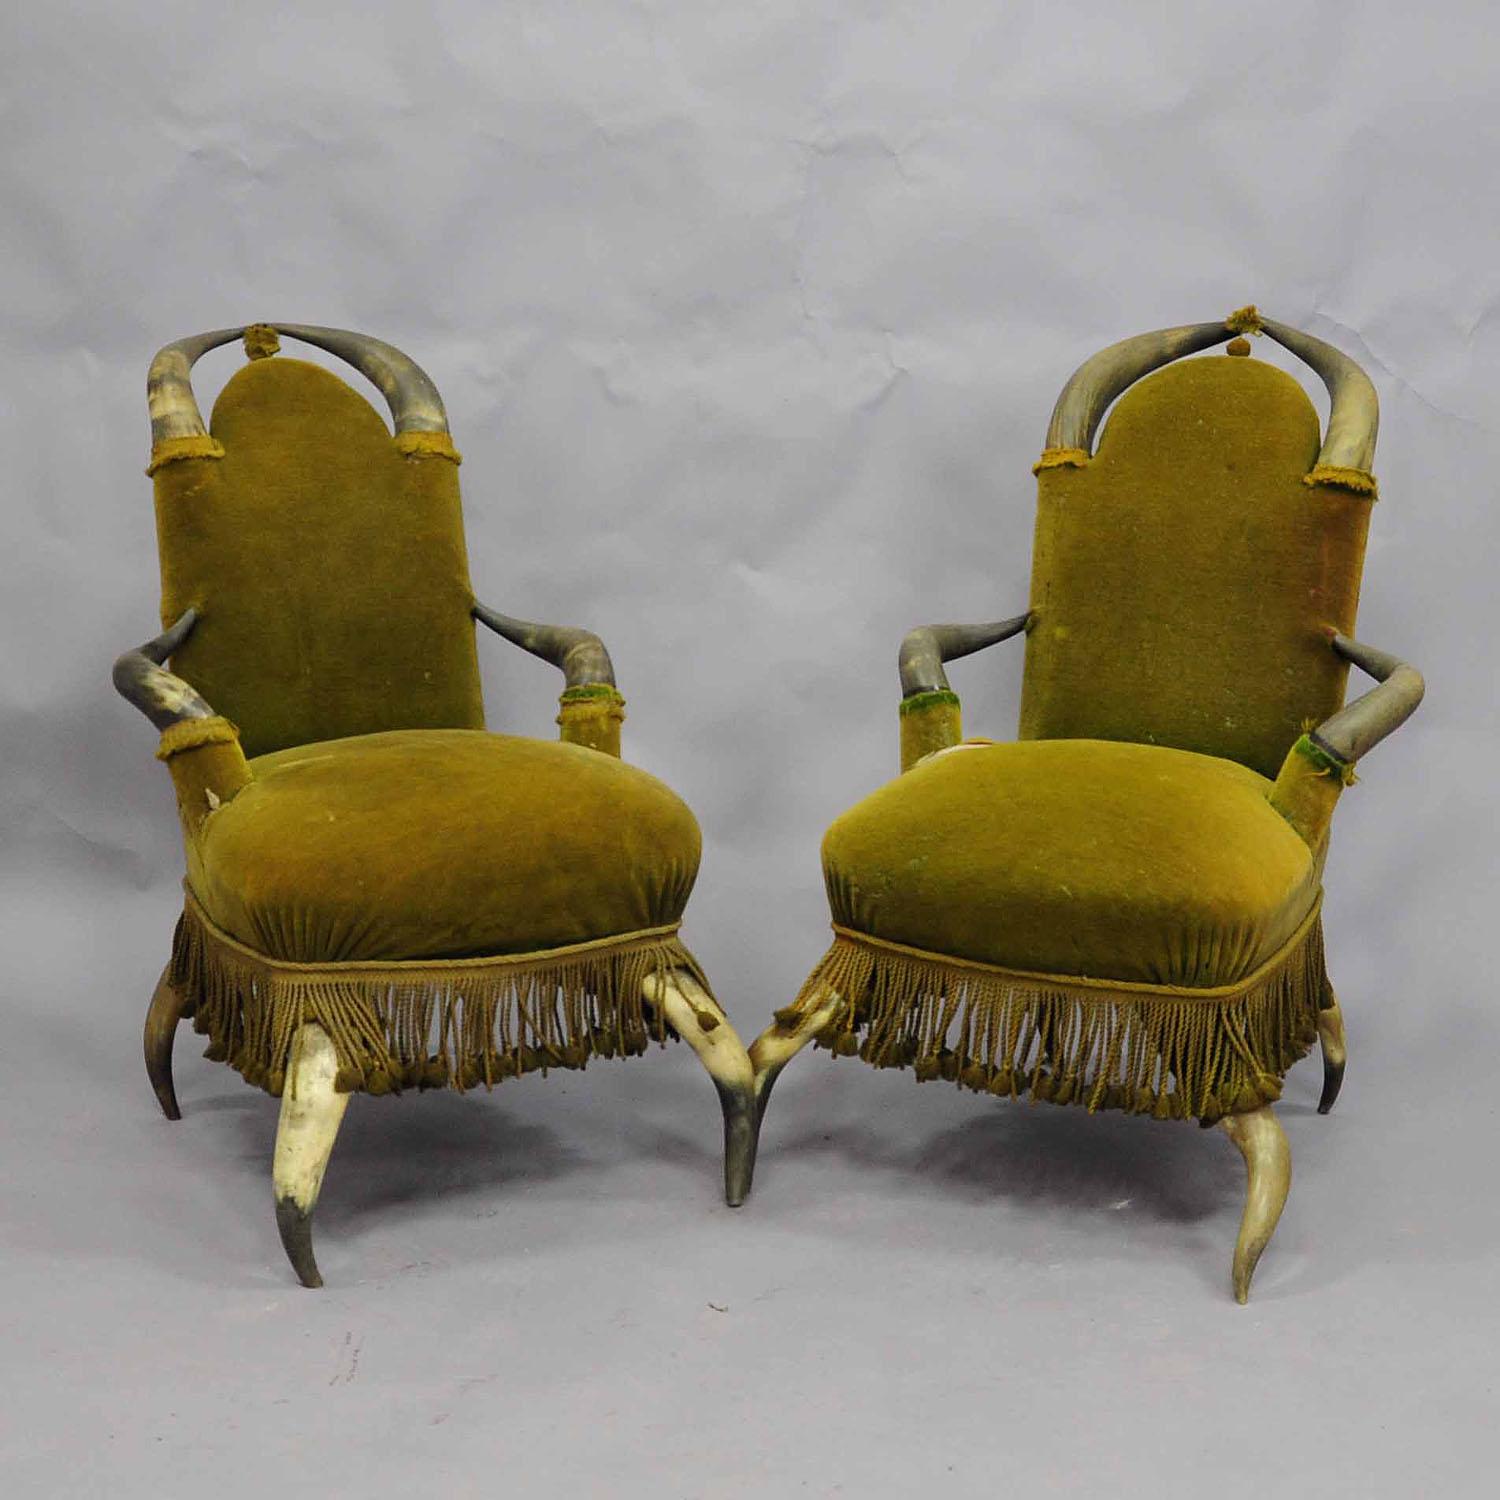 Four Antique Bull Horn Chairs ca. 1870 In Fair Condition For Sale In Berghuelen, DE